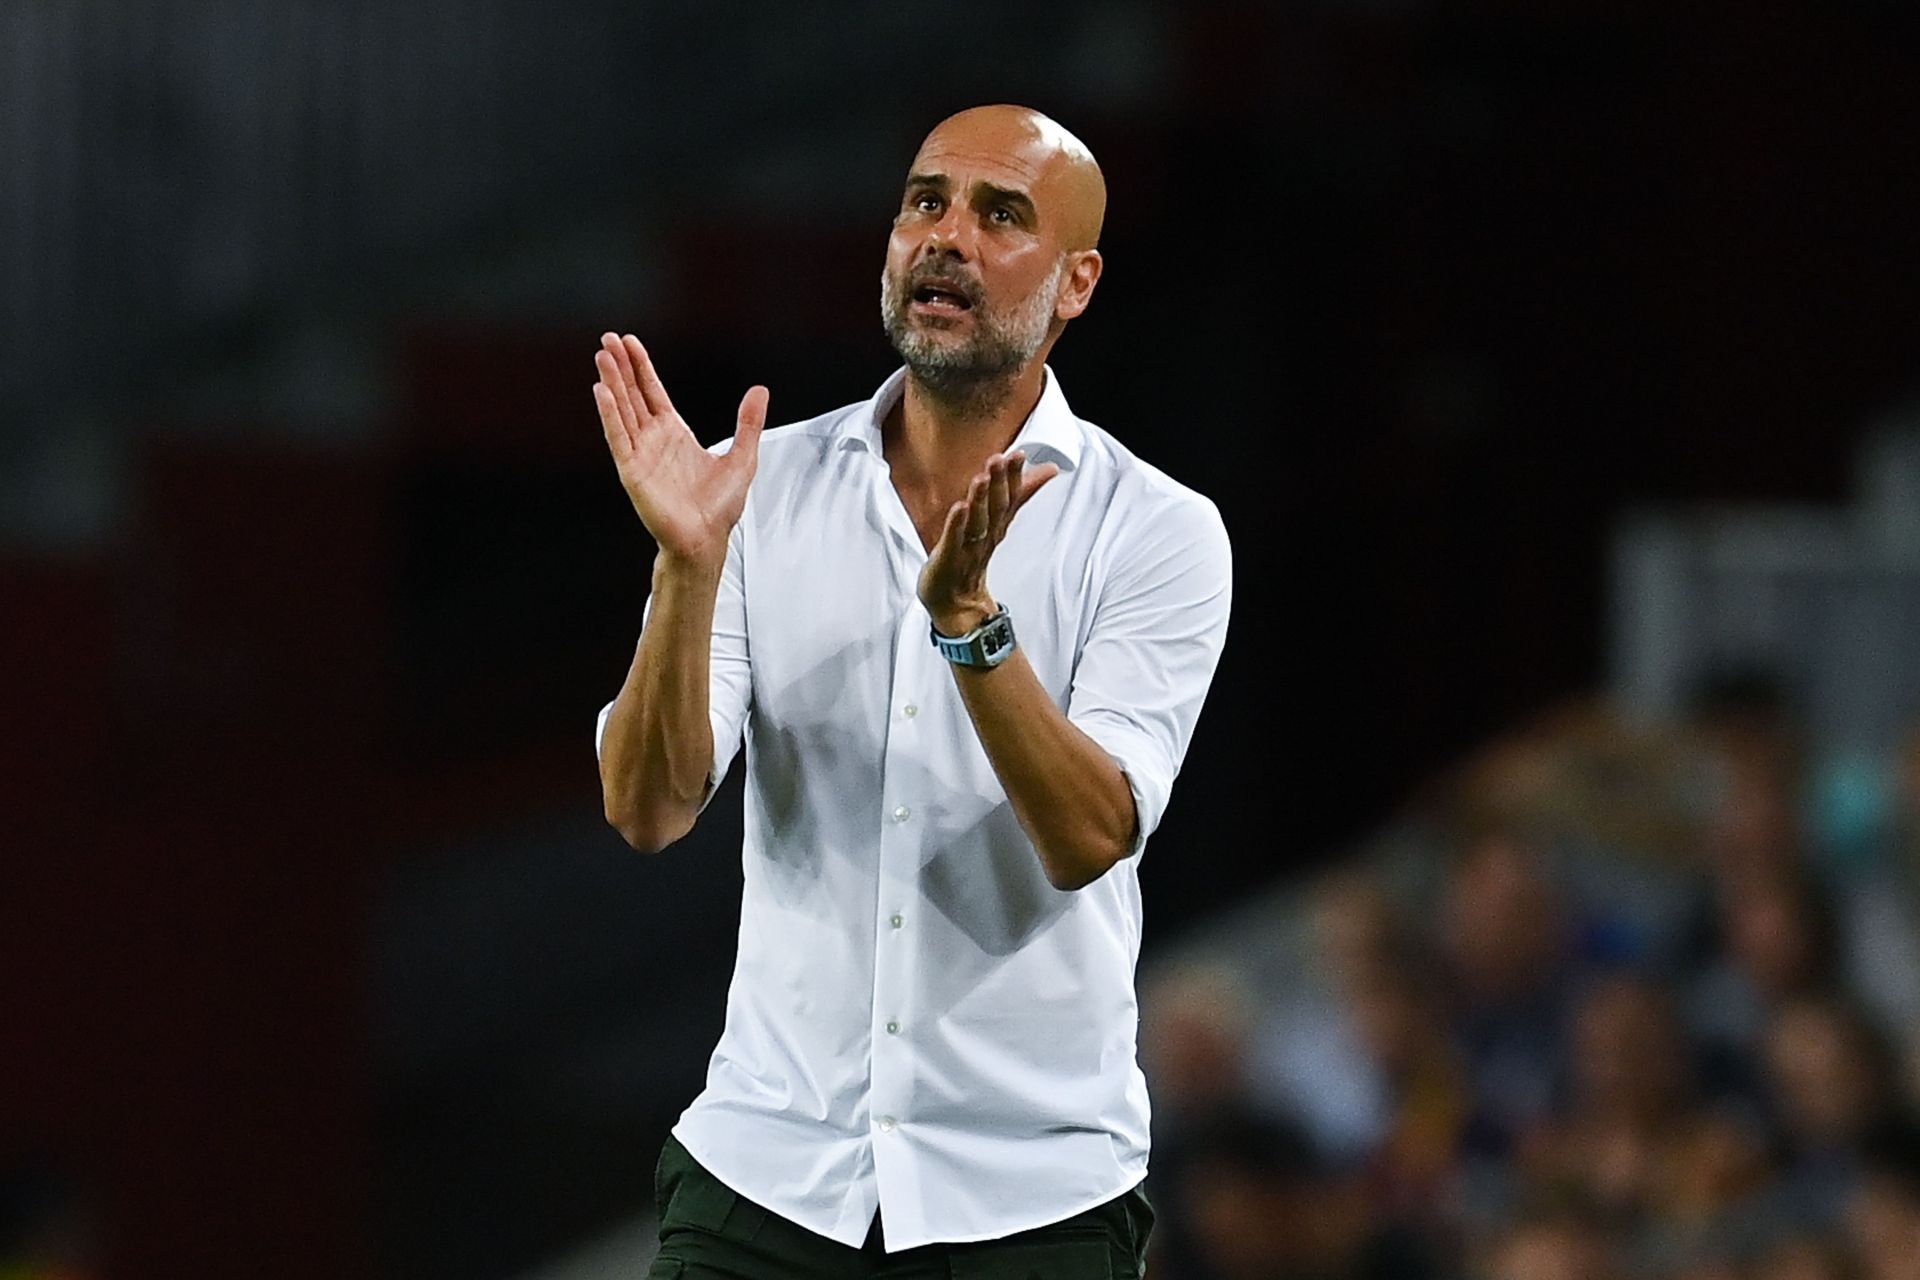 Guardiola is the highest paid manager in the Premier League